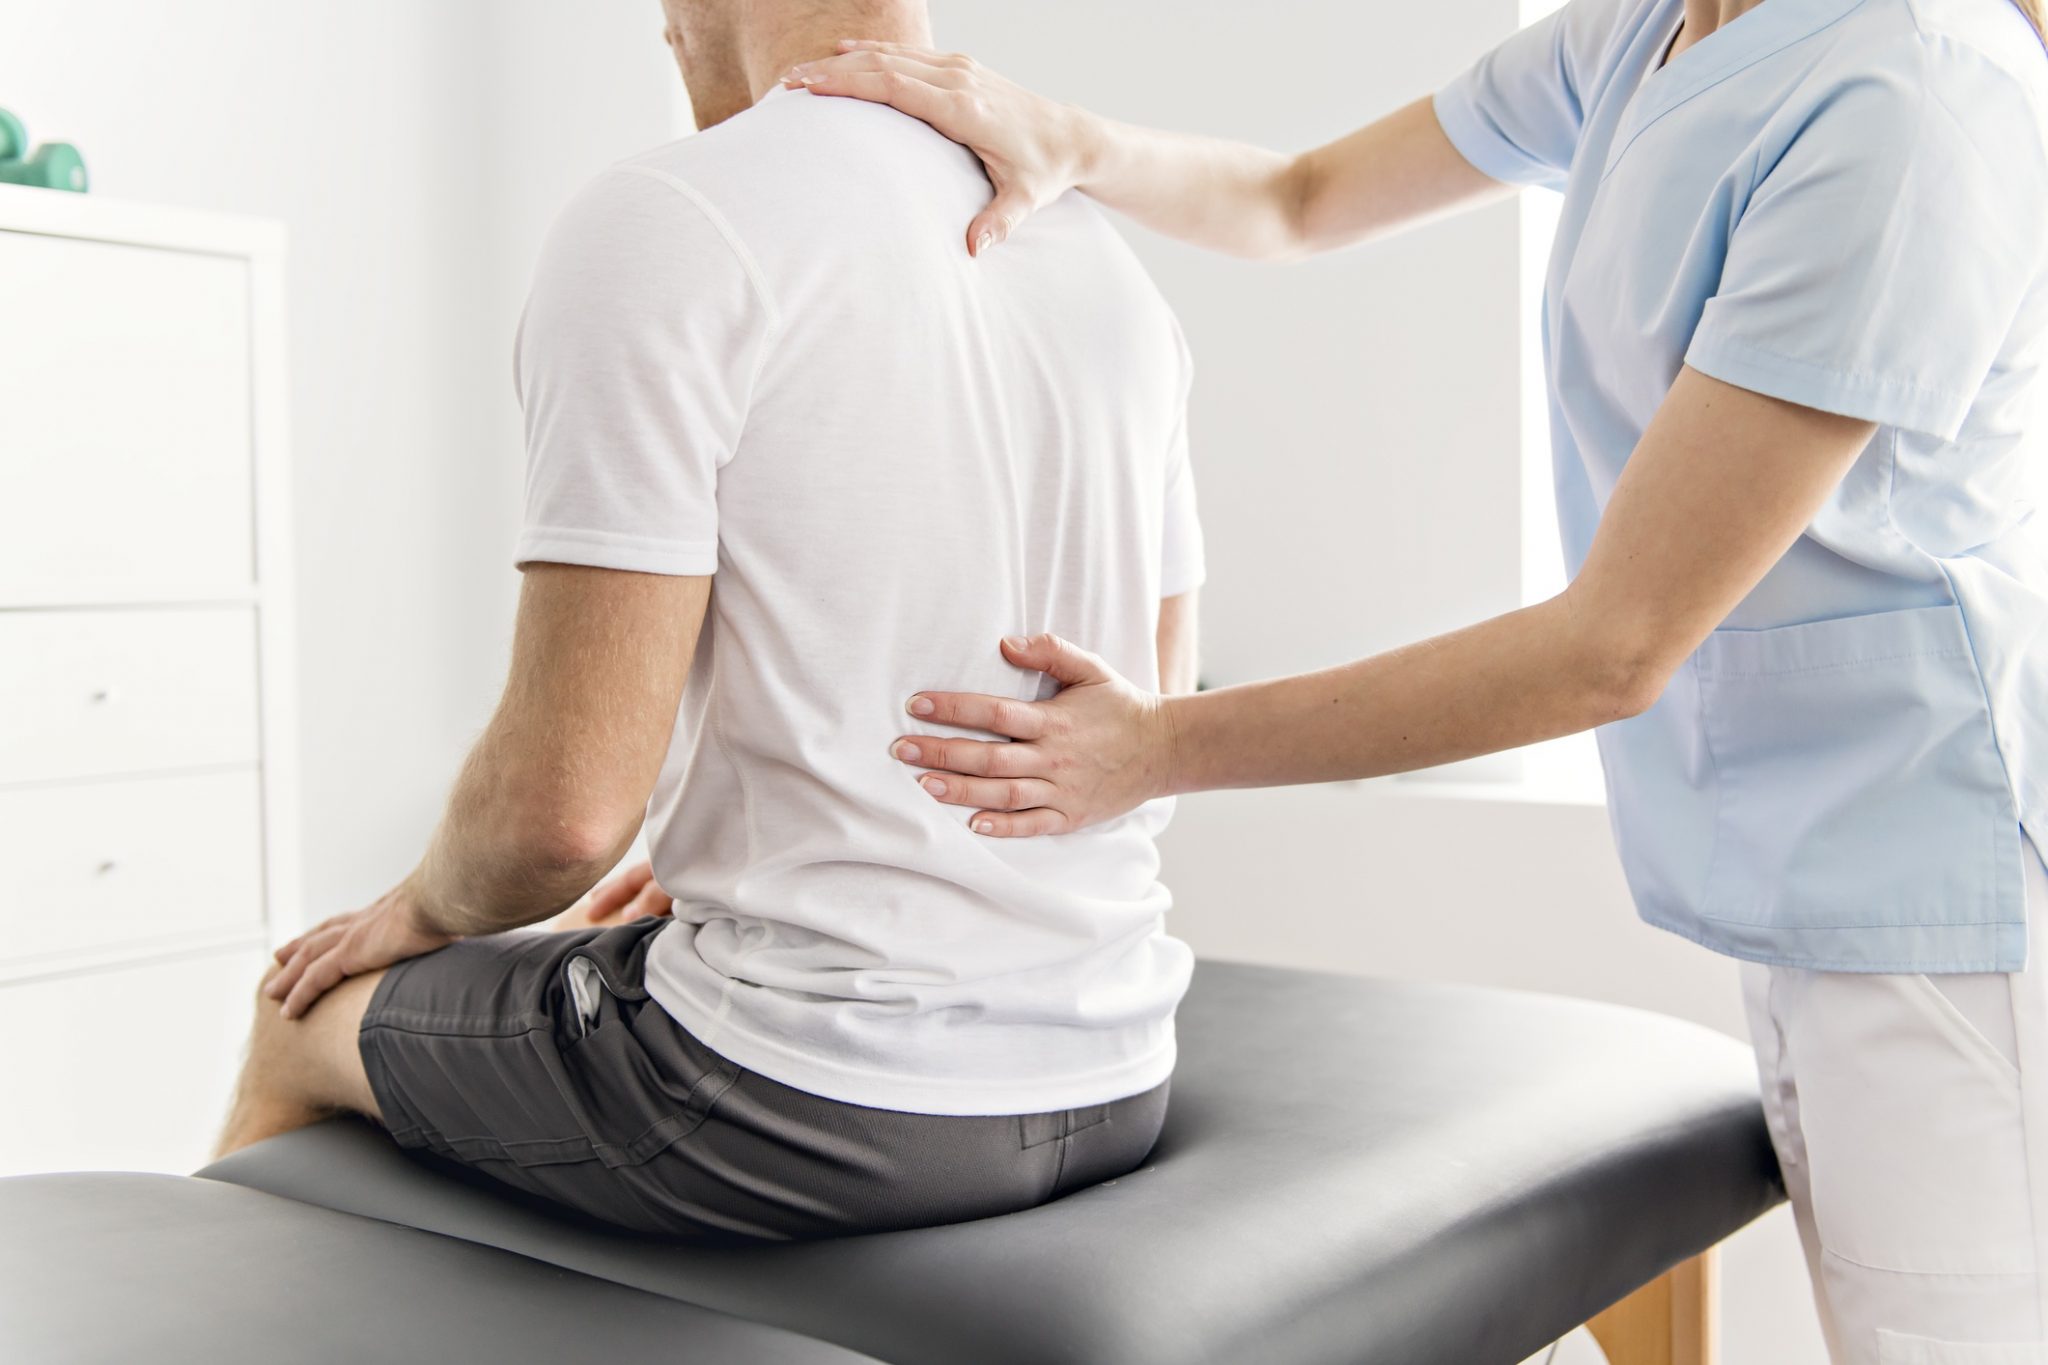 The Benefits of Finding a Local Chiropractor